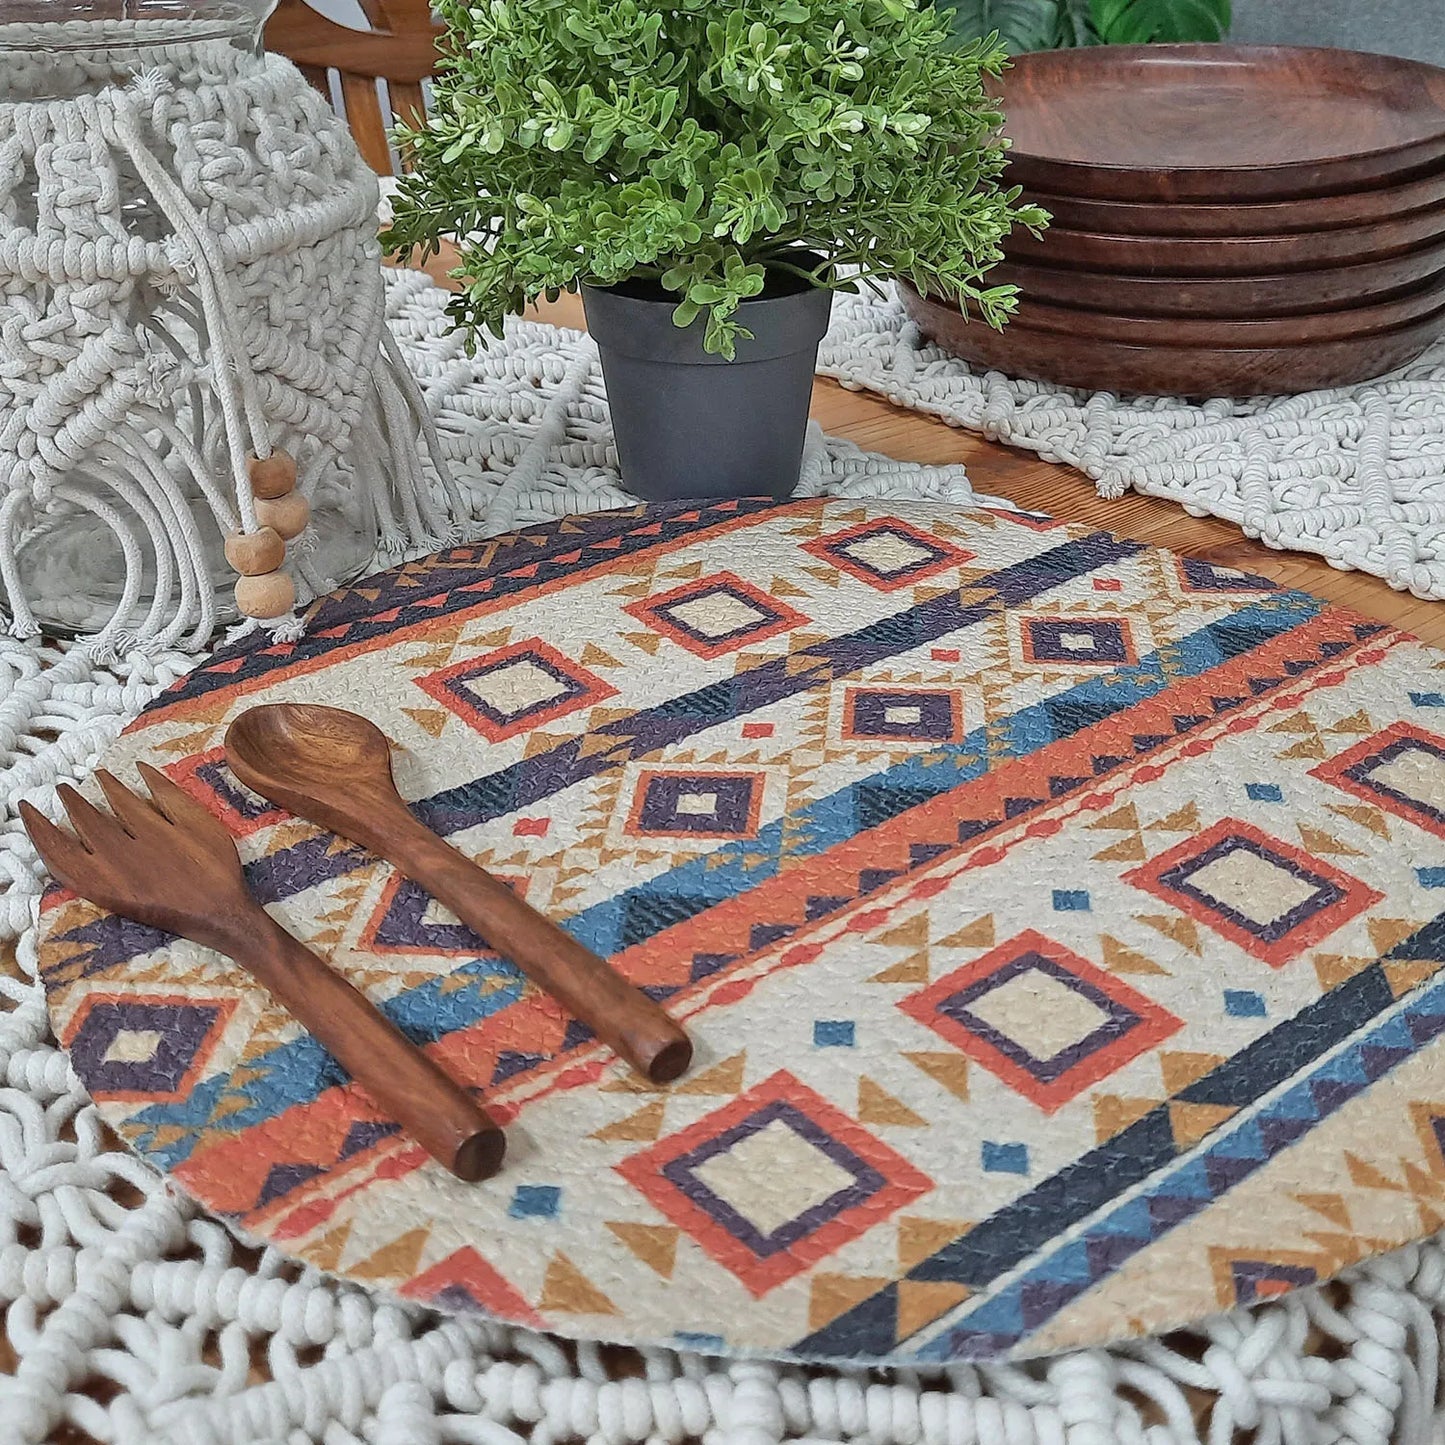 All Natural Round Cotton Braided Placemats – Tribal Motif